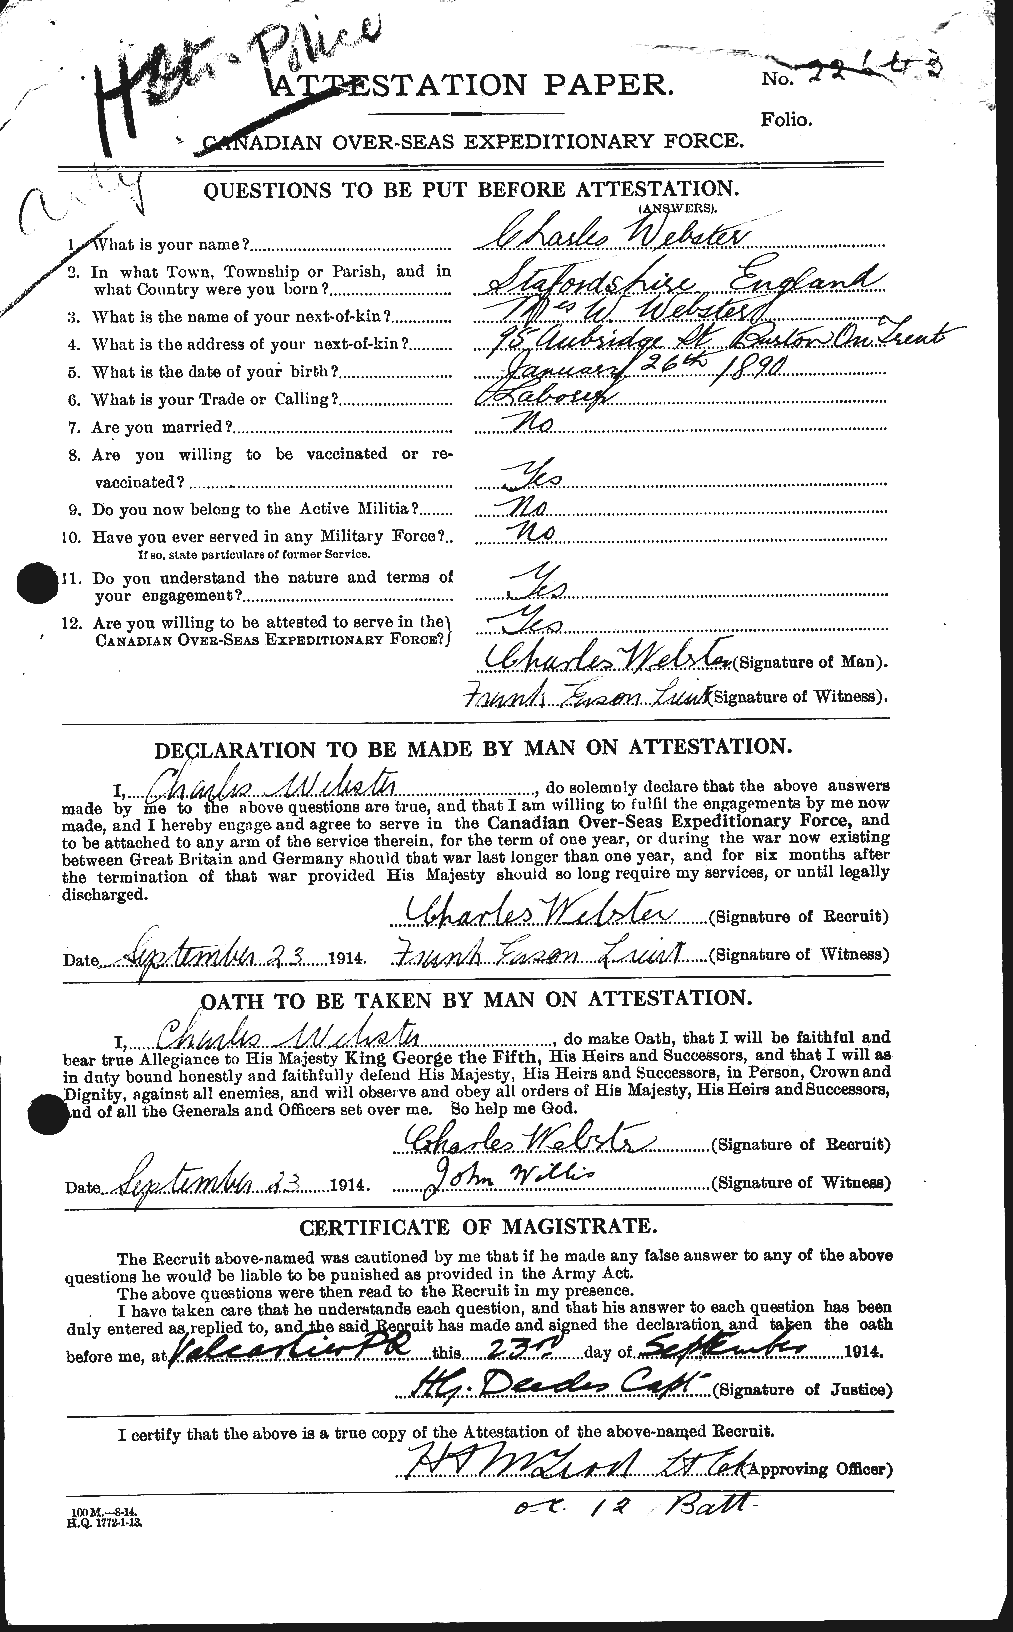 Personnel Records of the First World War - CEF 670283a